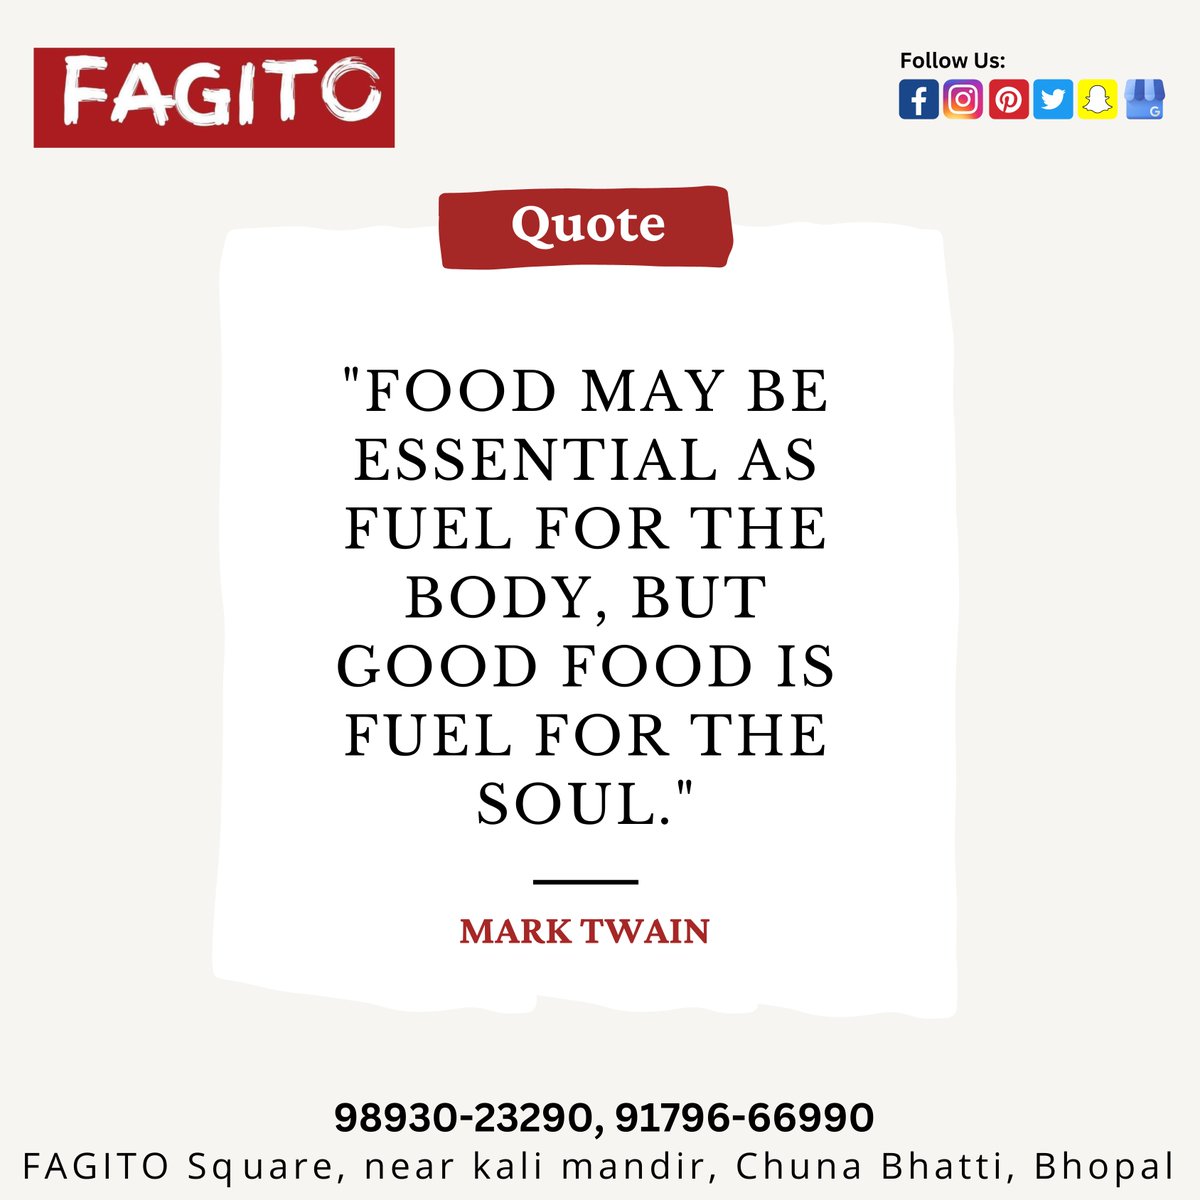 'FOOD MAY BE ESSENTIAL AS FUEL FOR THE BODY, BUT GOOD FOOD IS FUEL FOR THE SOUL.'

For table reservation
Call:- 98930-23290, 91796-66990, 0755-4200100

#foodquote #foodquotes #juliachild #food #quoteoftheday #foodie #quotes #foodquoteslove #foodporn #fagito_delivery #fagito